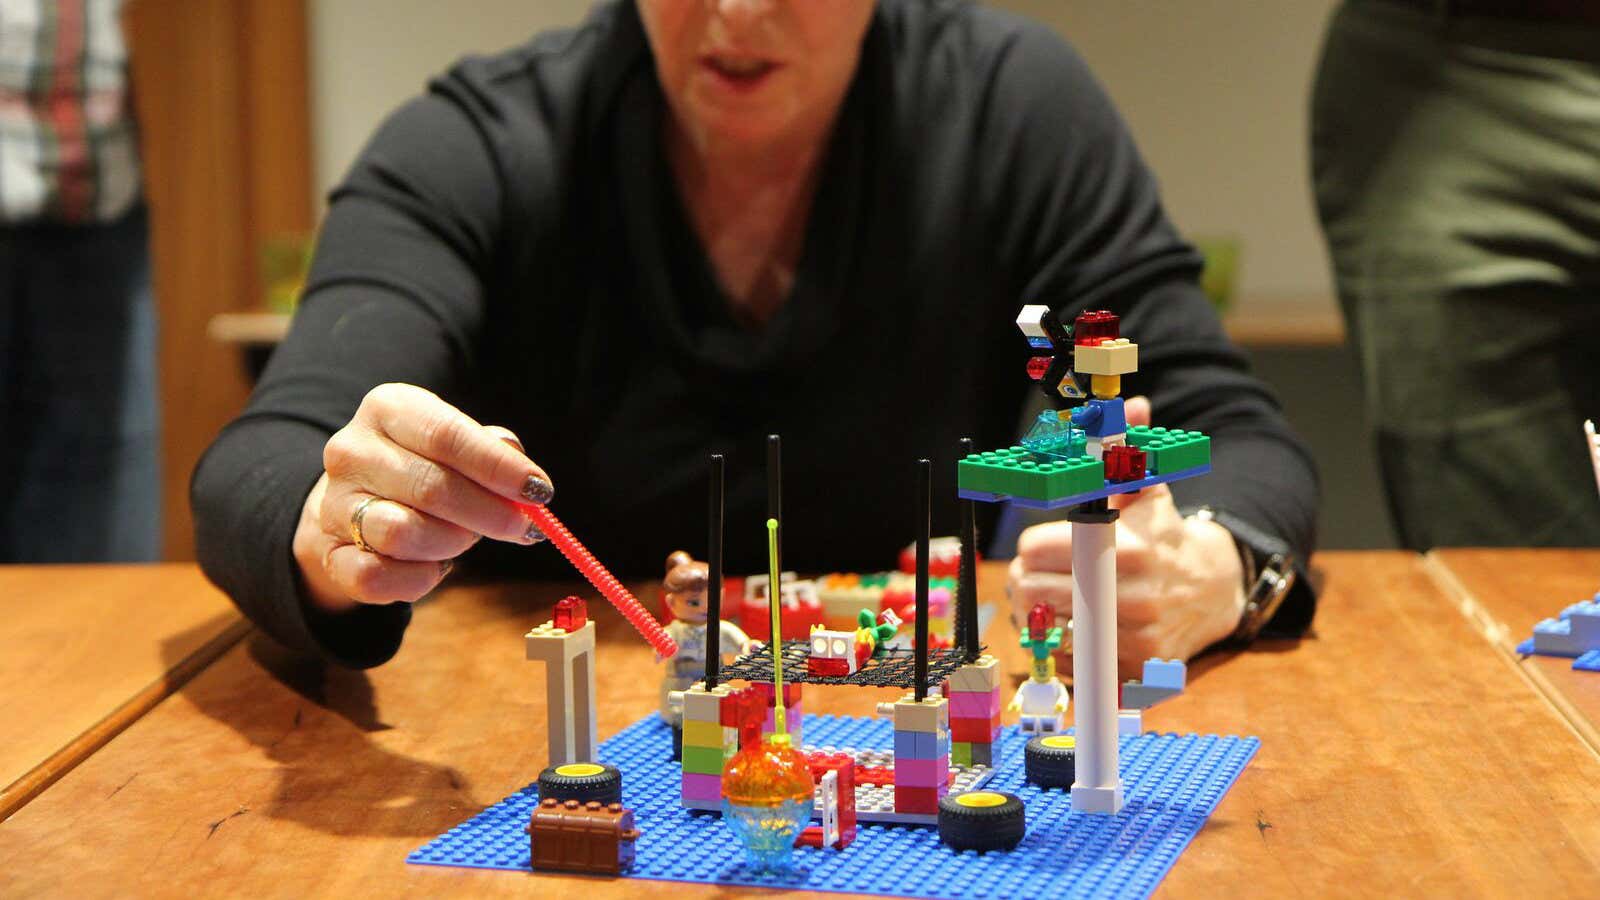 Teaching creativity from the playroom all the way to the boardroom.